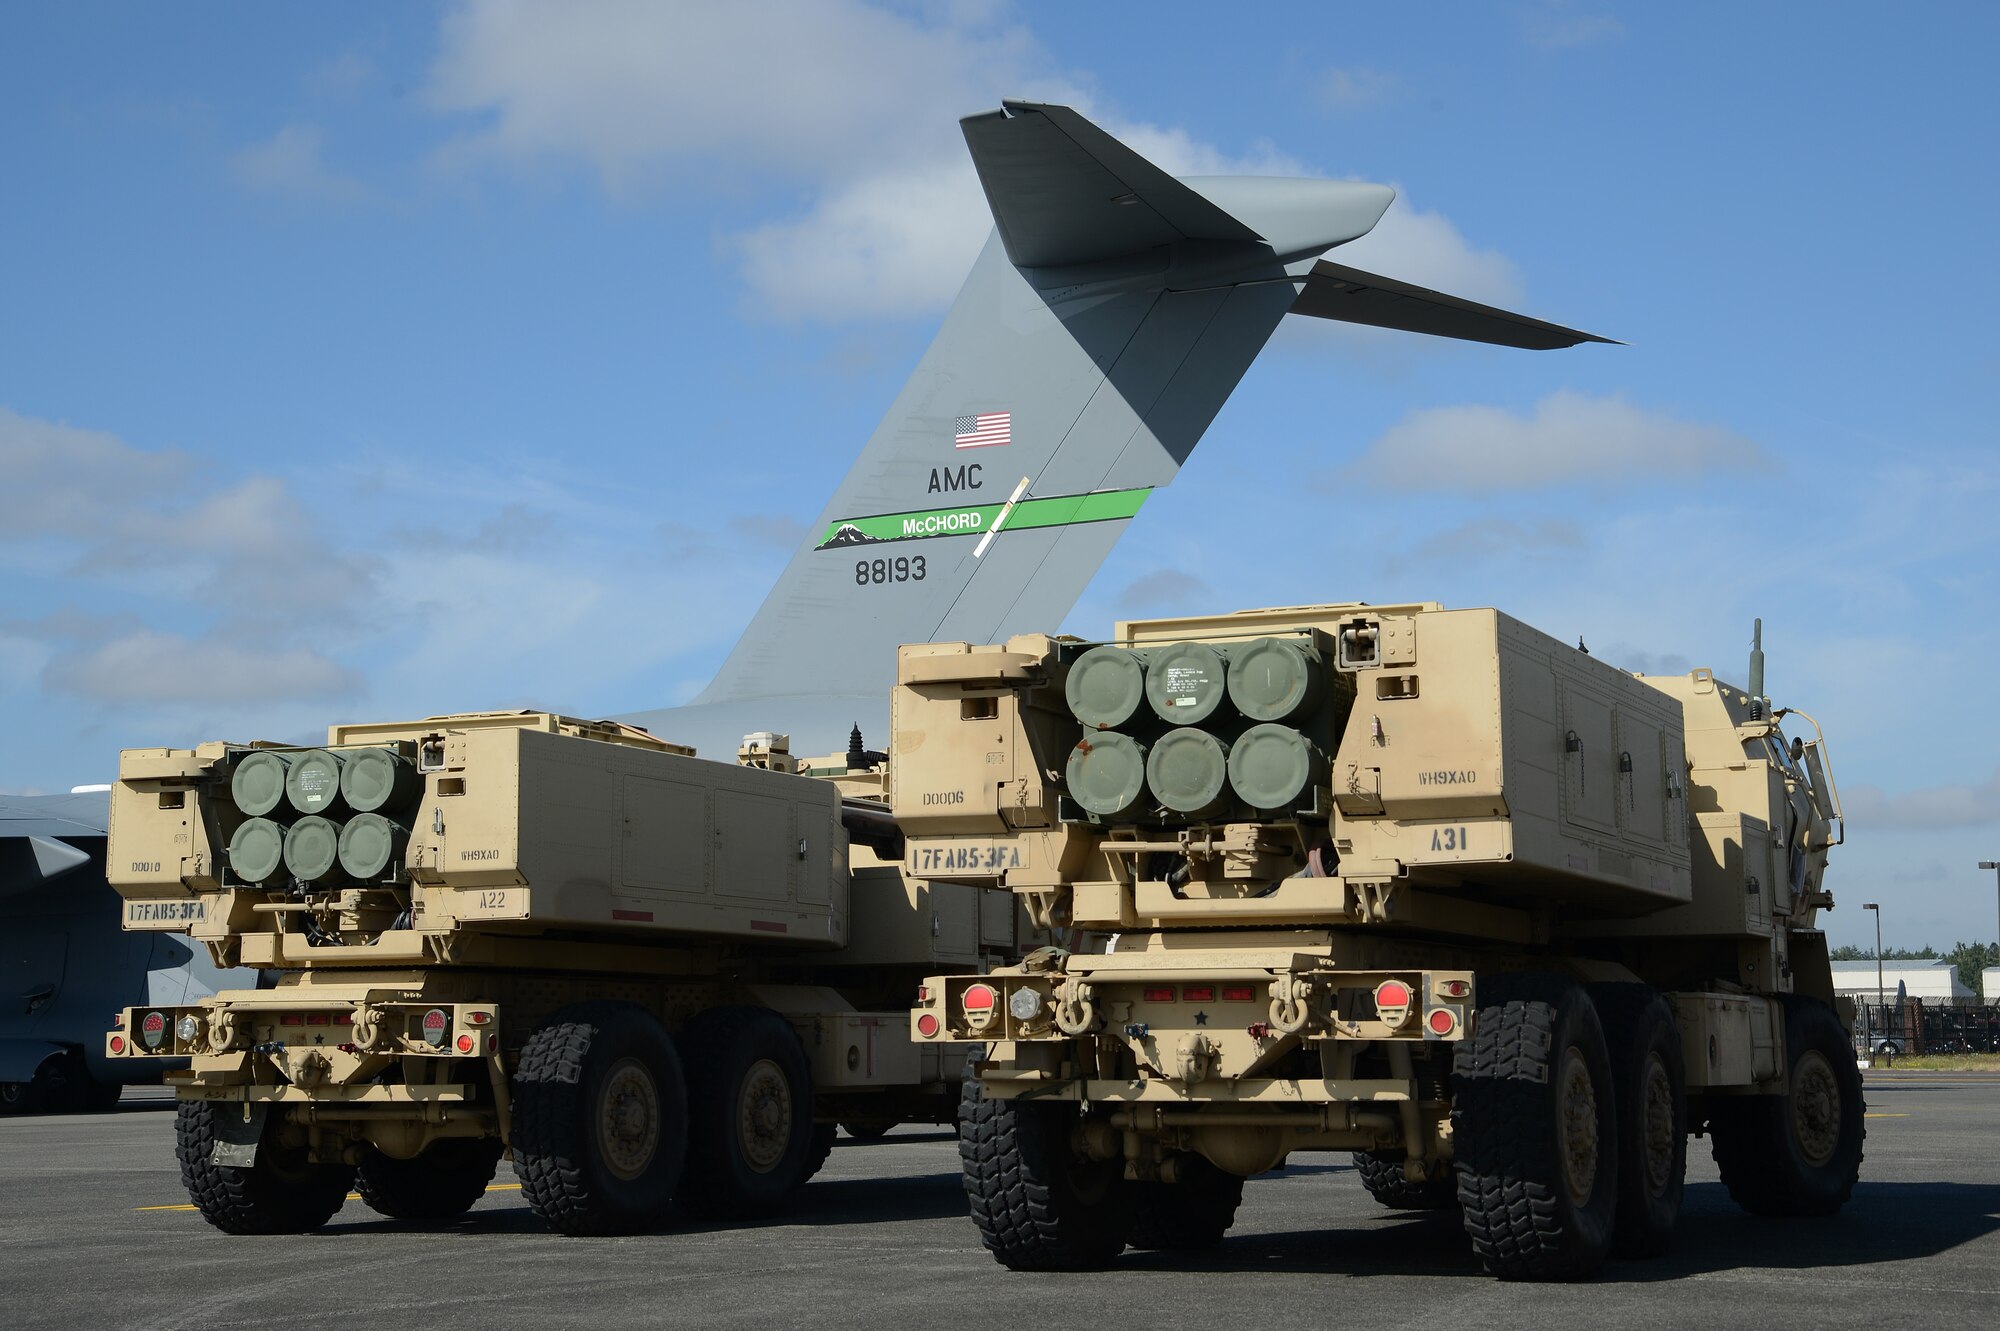 Two High Mobility Artillery Rocket Systems are prepped for loading onto a C-17 Globemaster III aircraft prior to a rapid infiltration HI-RAIN exercise June 22, 2016 at Joint Base Lewis-McChord, Wash. Each HIMARS weighs more than 20,000 pounds and is capable of carrying and firing six rockets. (U.S. Air Force photo/ Senior Airman Jacob Jimenez) 